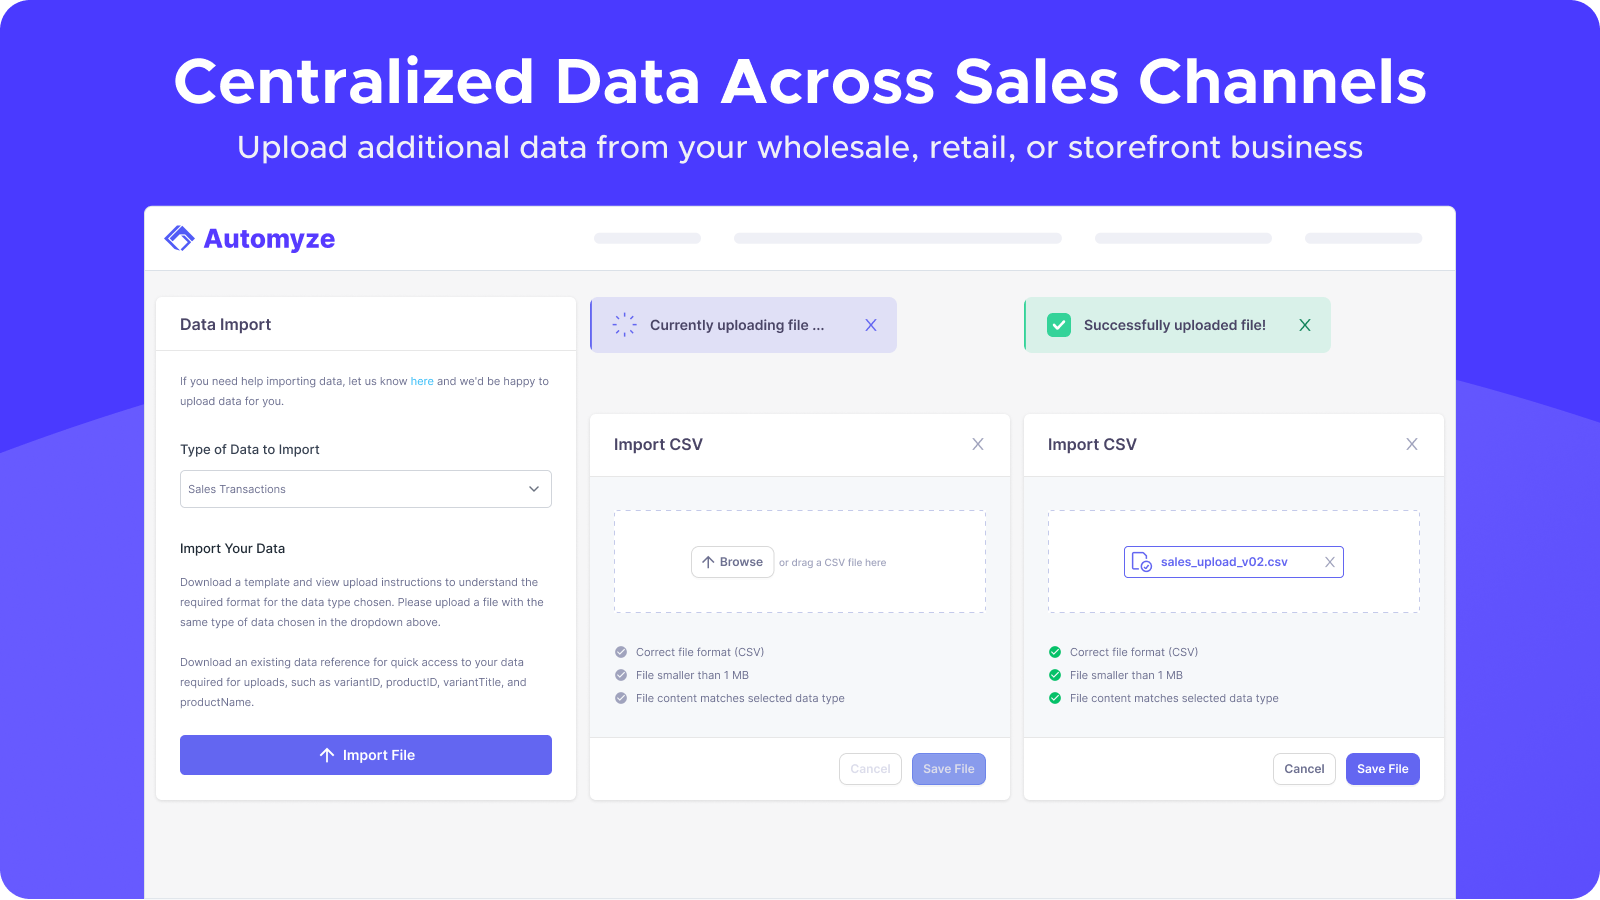 Upload additional data from your wholesale, retail, or storefron